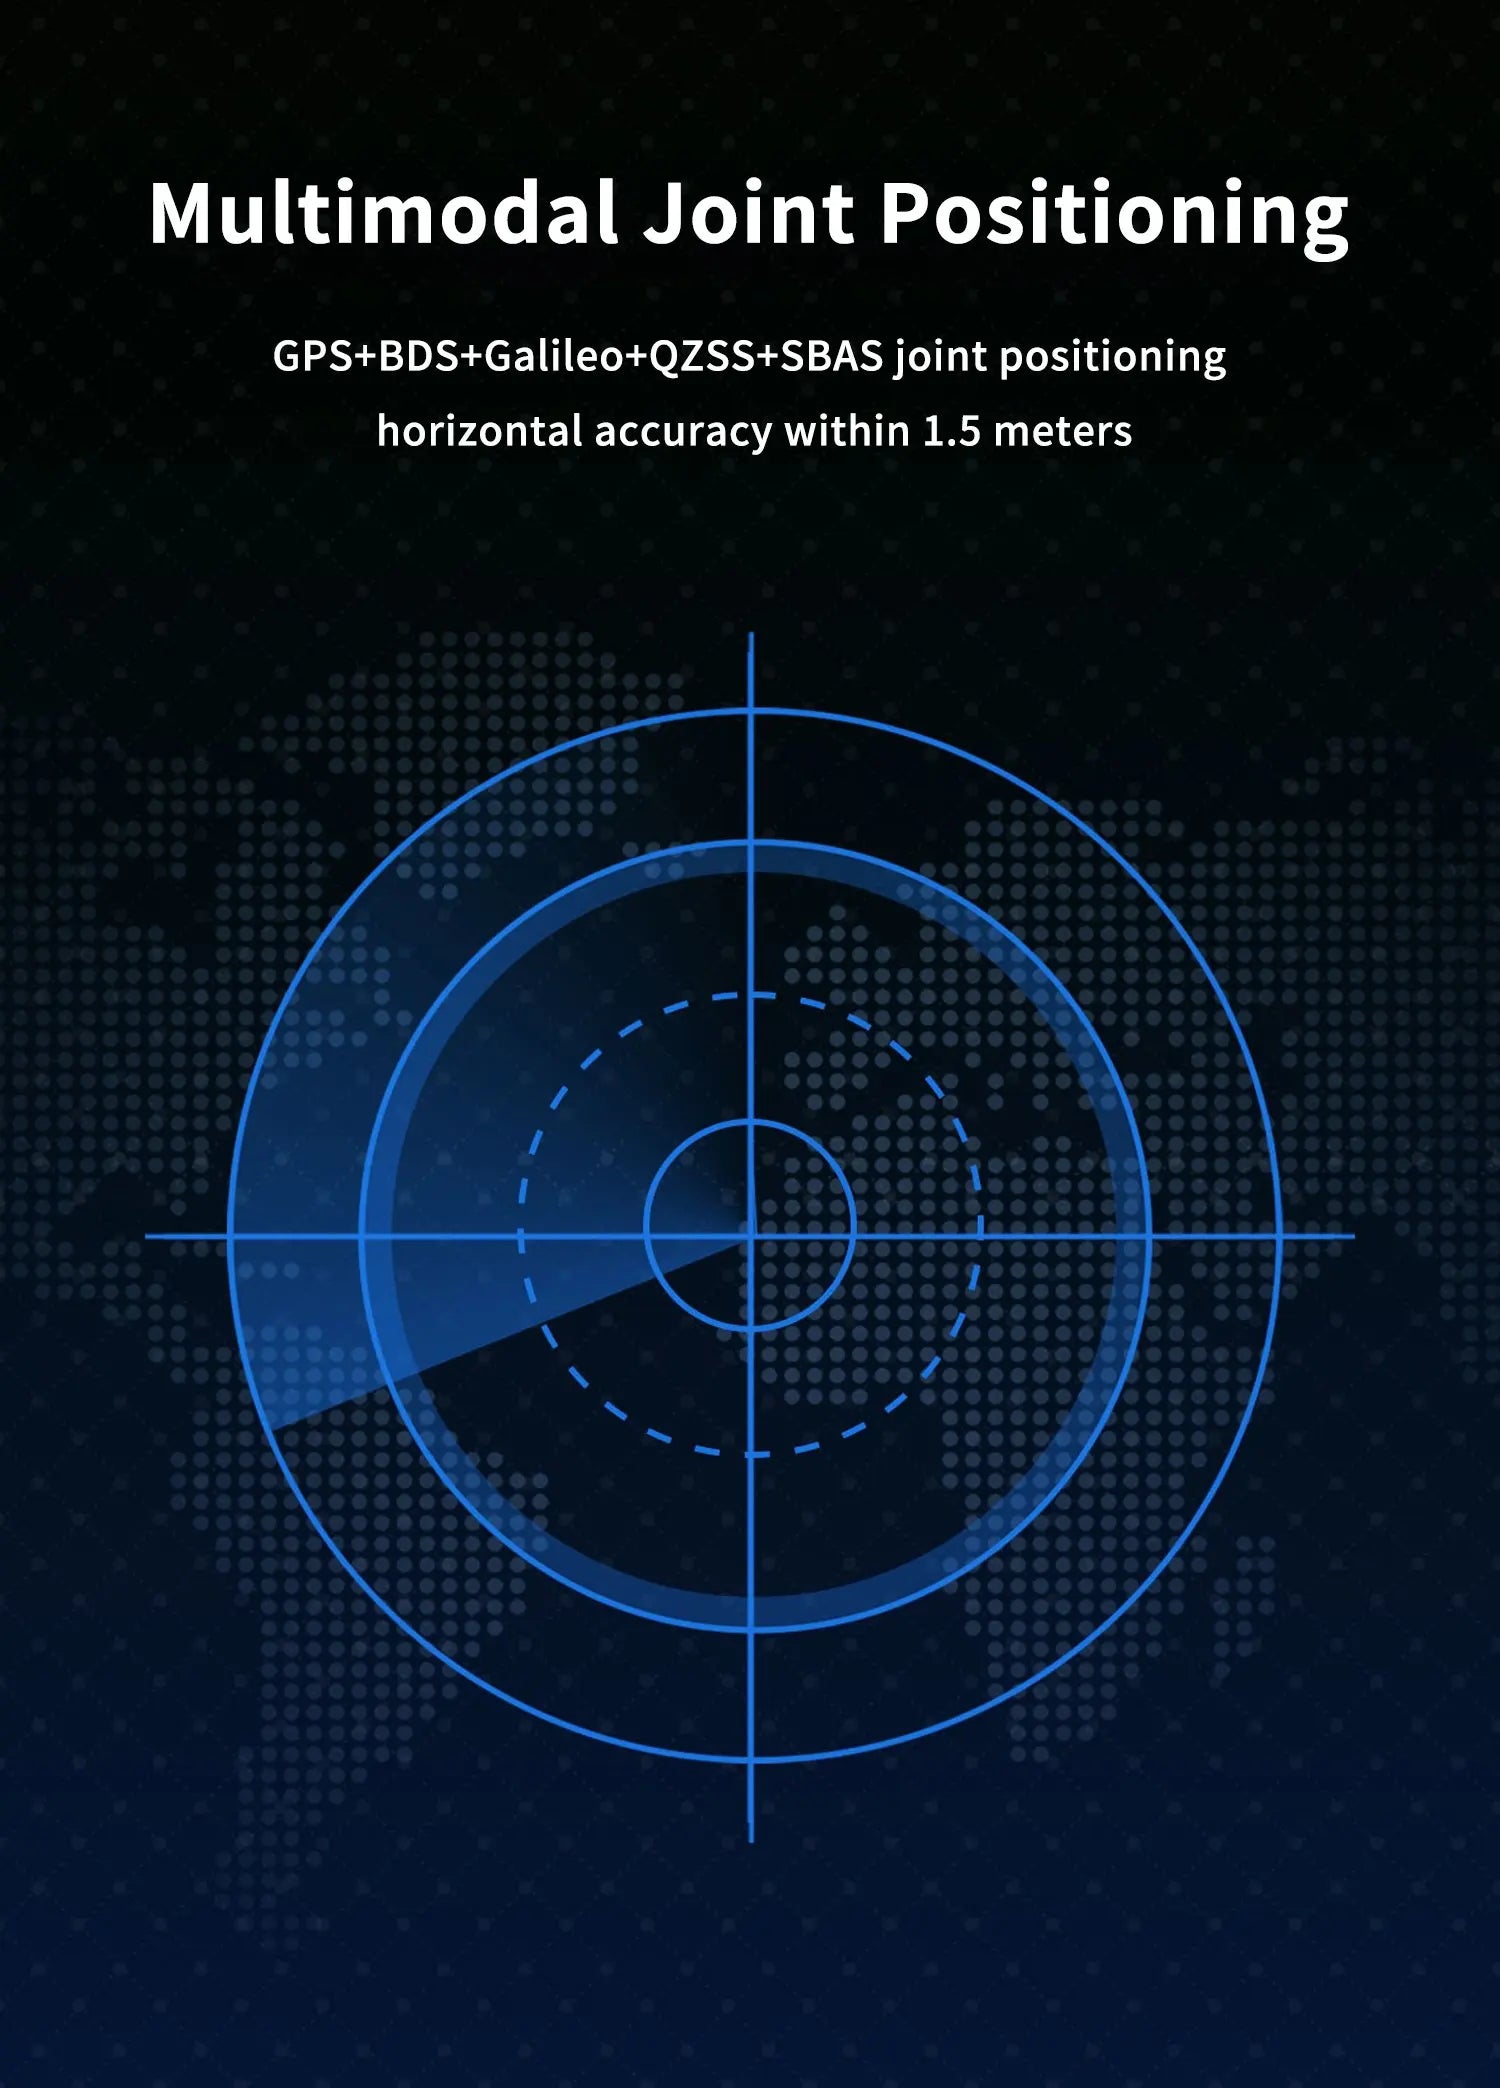 GEPRC GEP-M10 Series GPS, Multimodal Joint Positioning GPS+BDS+Galileo+QZSS+